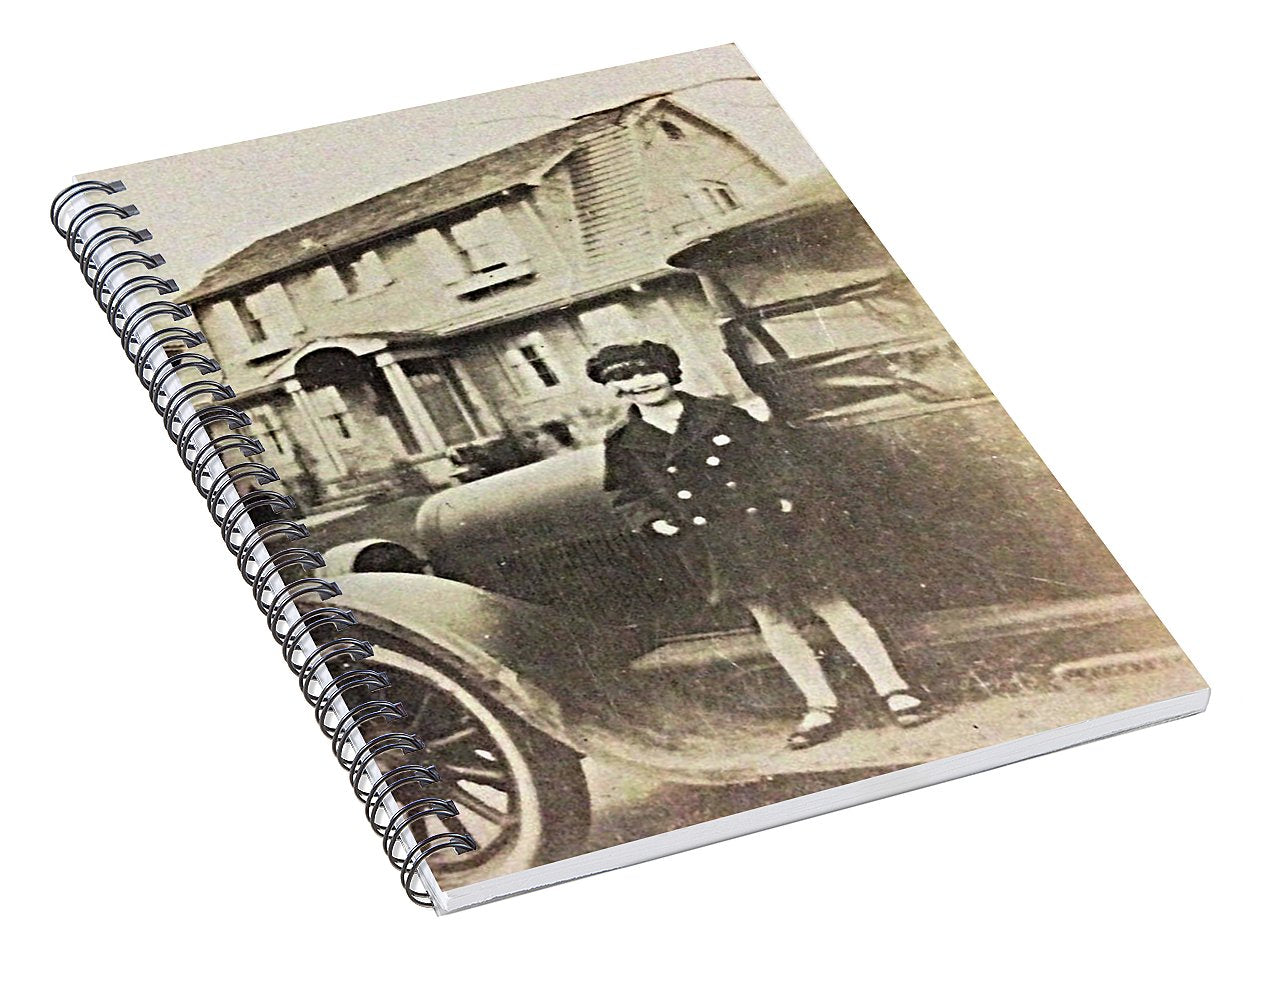 Little 1920s Girl With Car - Spiral Notebook